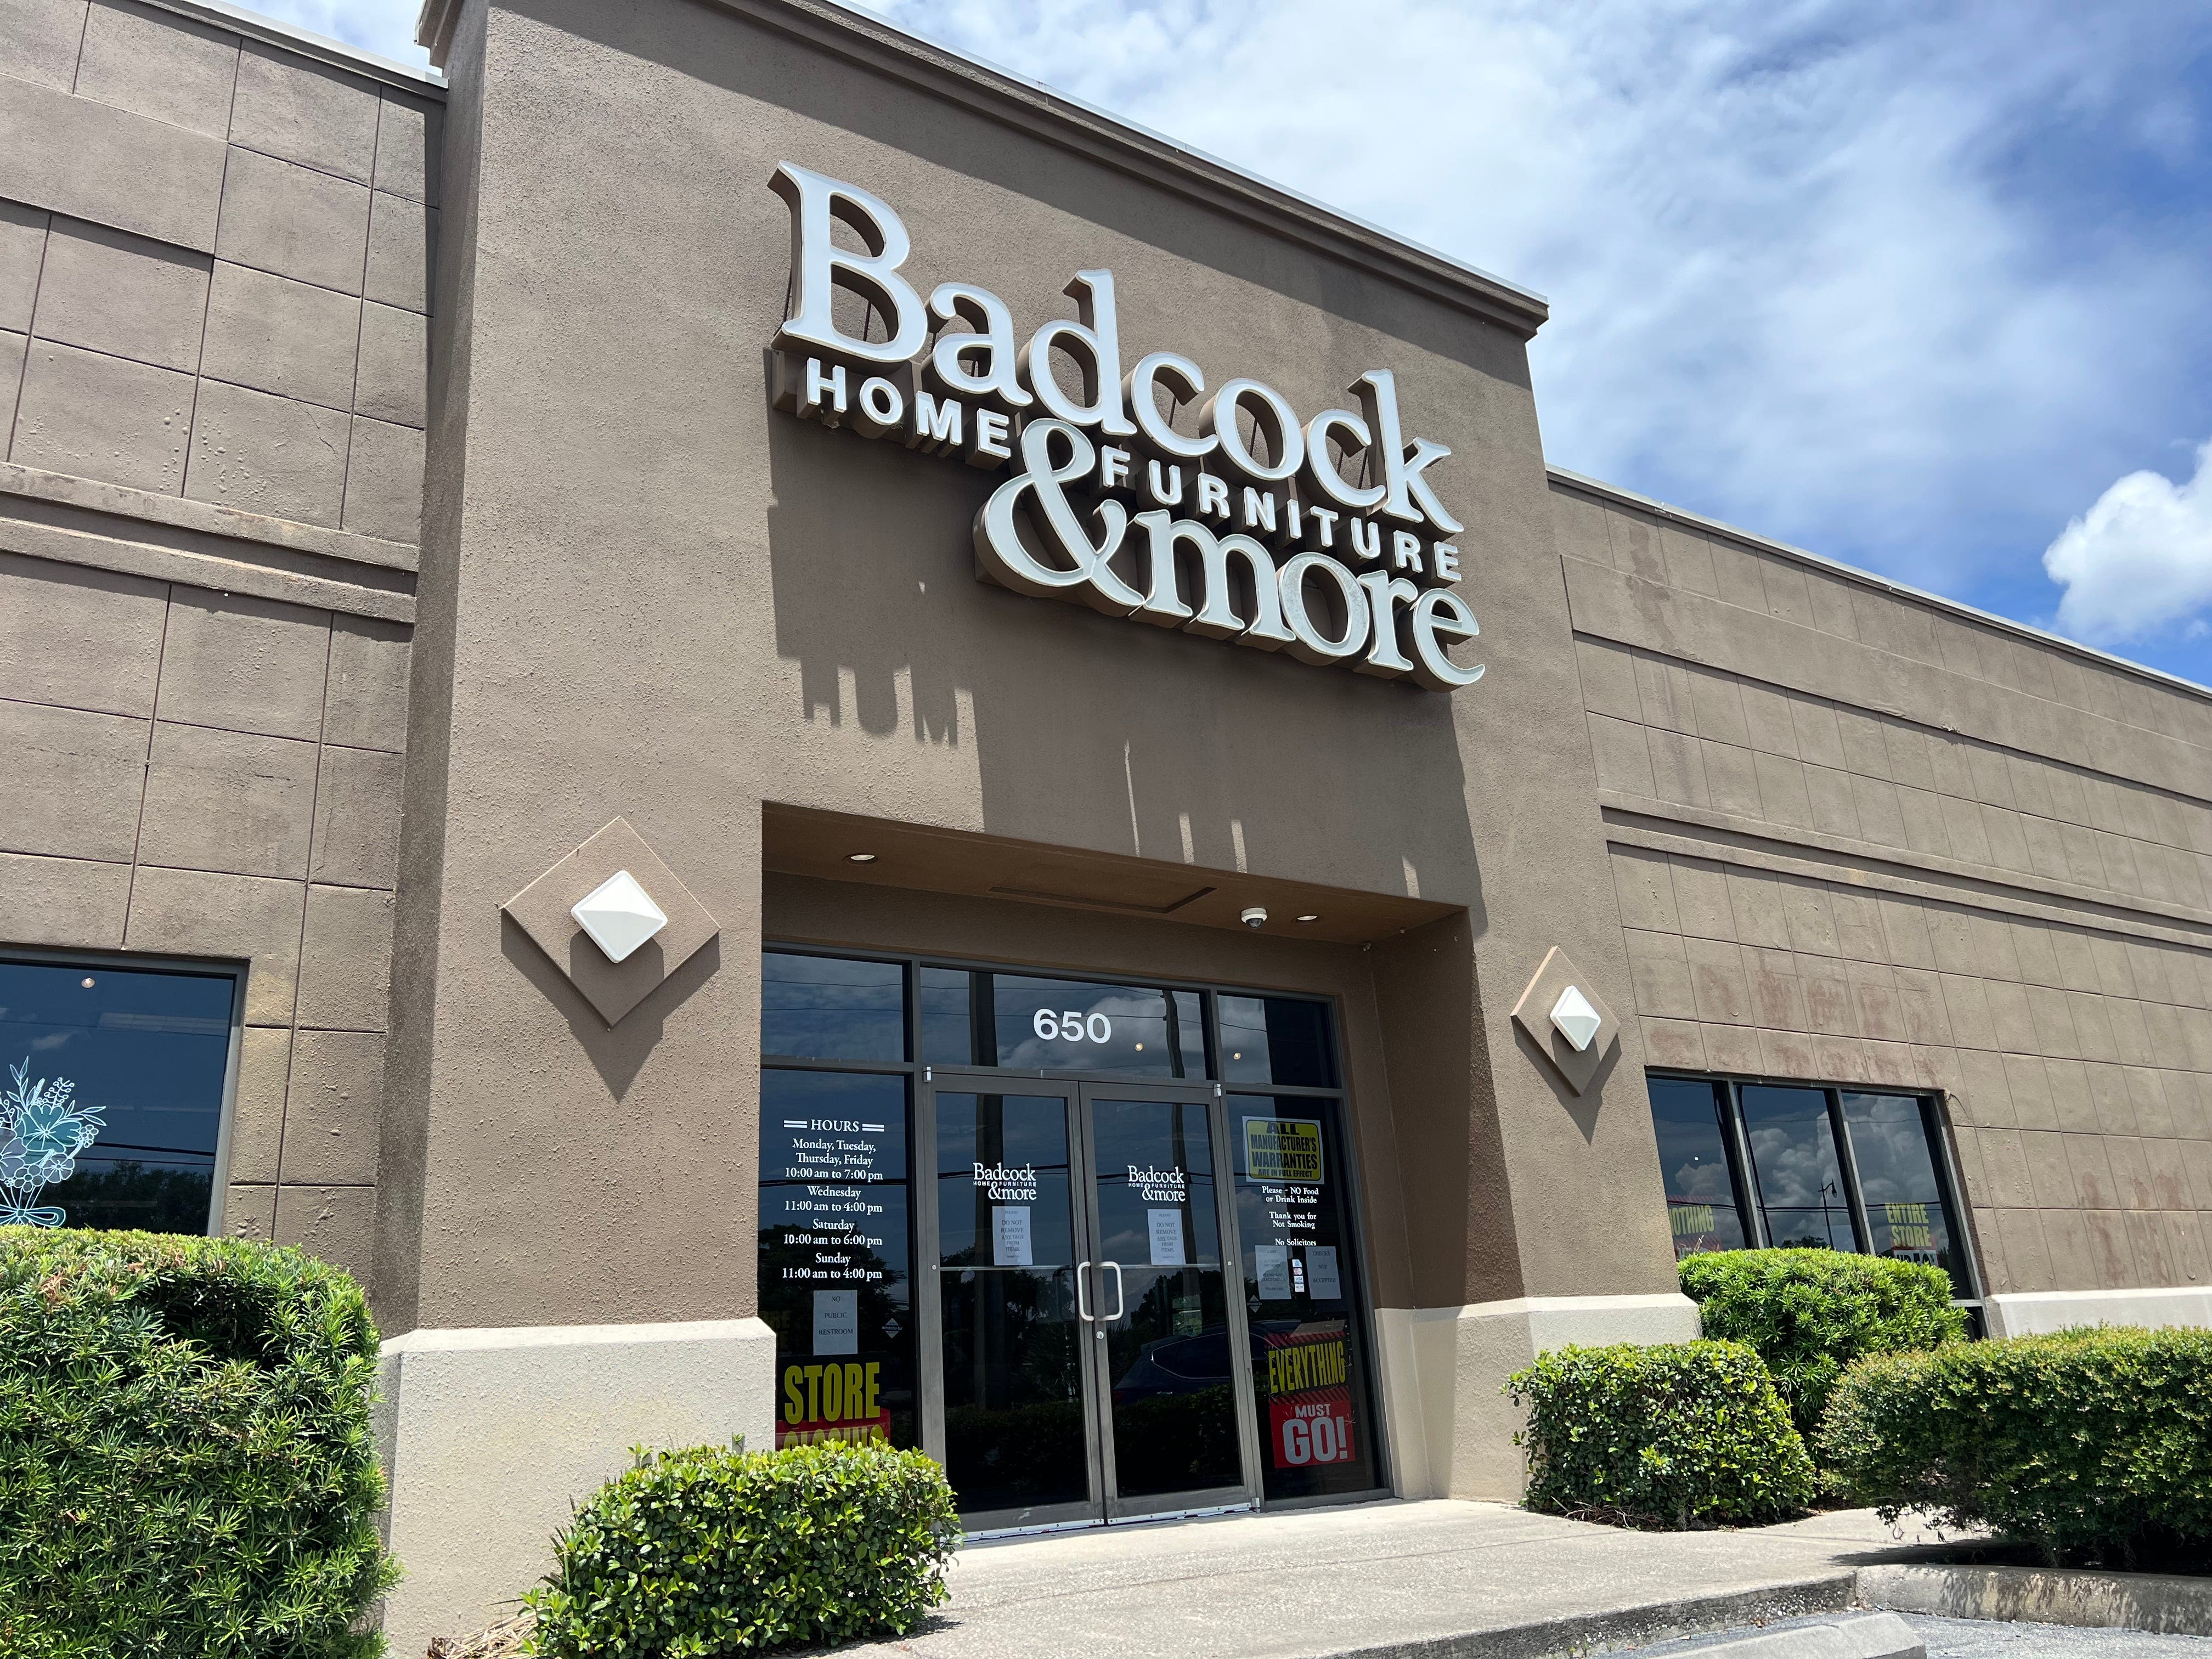 Badcock Home Furniture & More closing all of its stores, including several in Big Bend